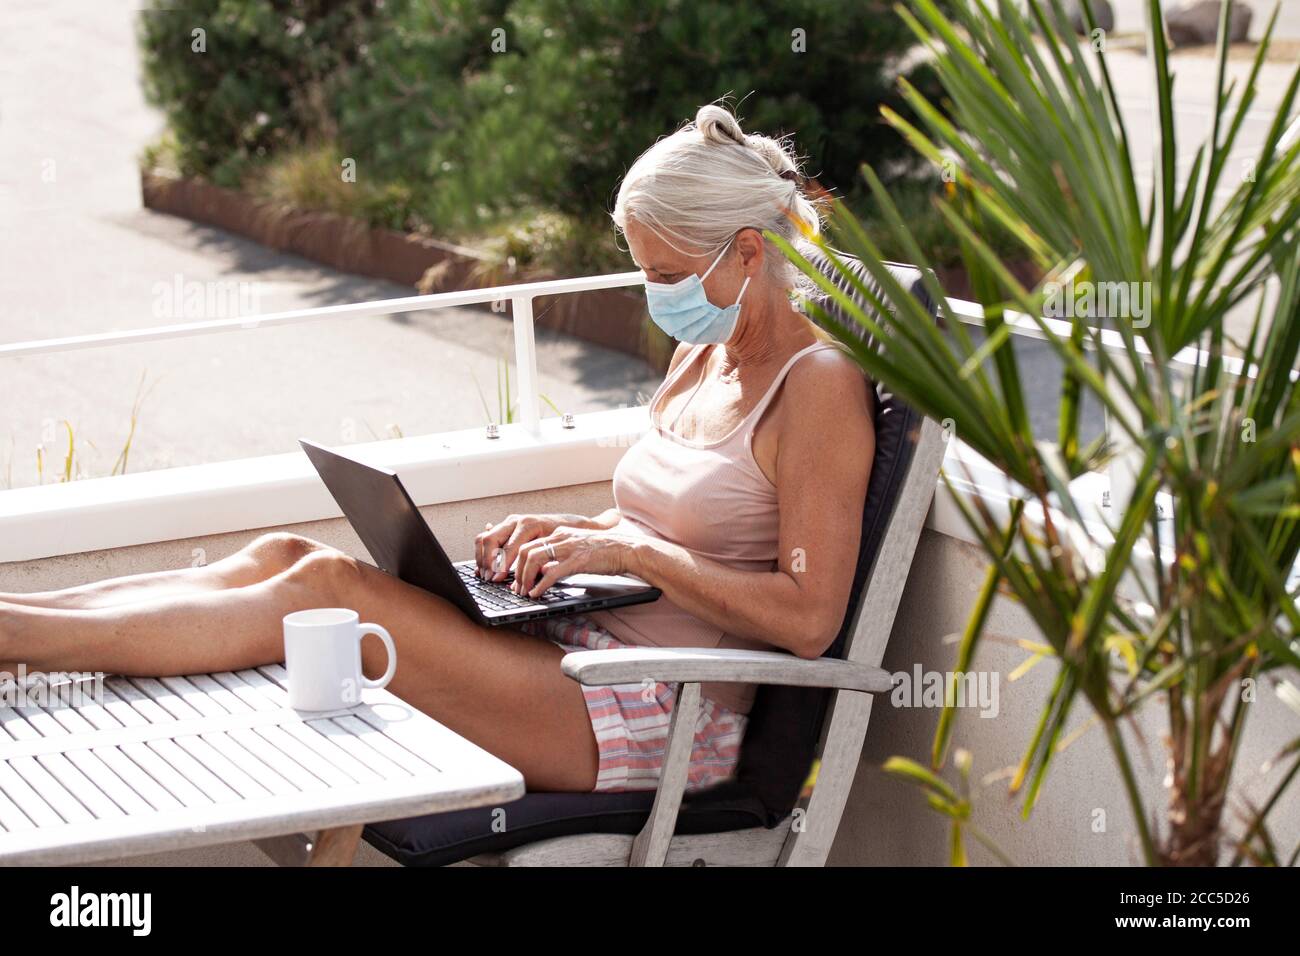 Sun tanned senior woman in shorts sitting on a balcony wearing a medical face mask to protect against Coronavirus or Covid-19 pandemic while working o Stock Photo